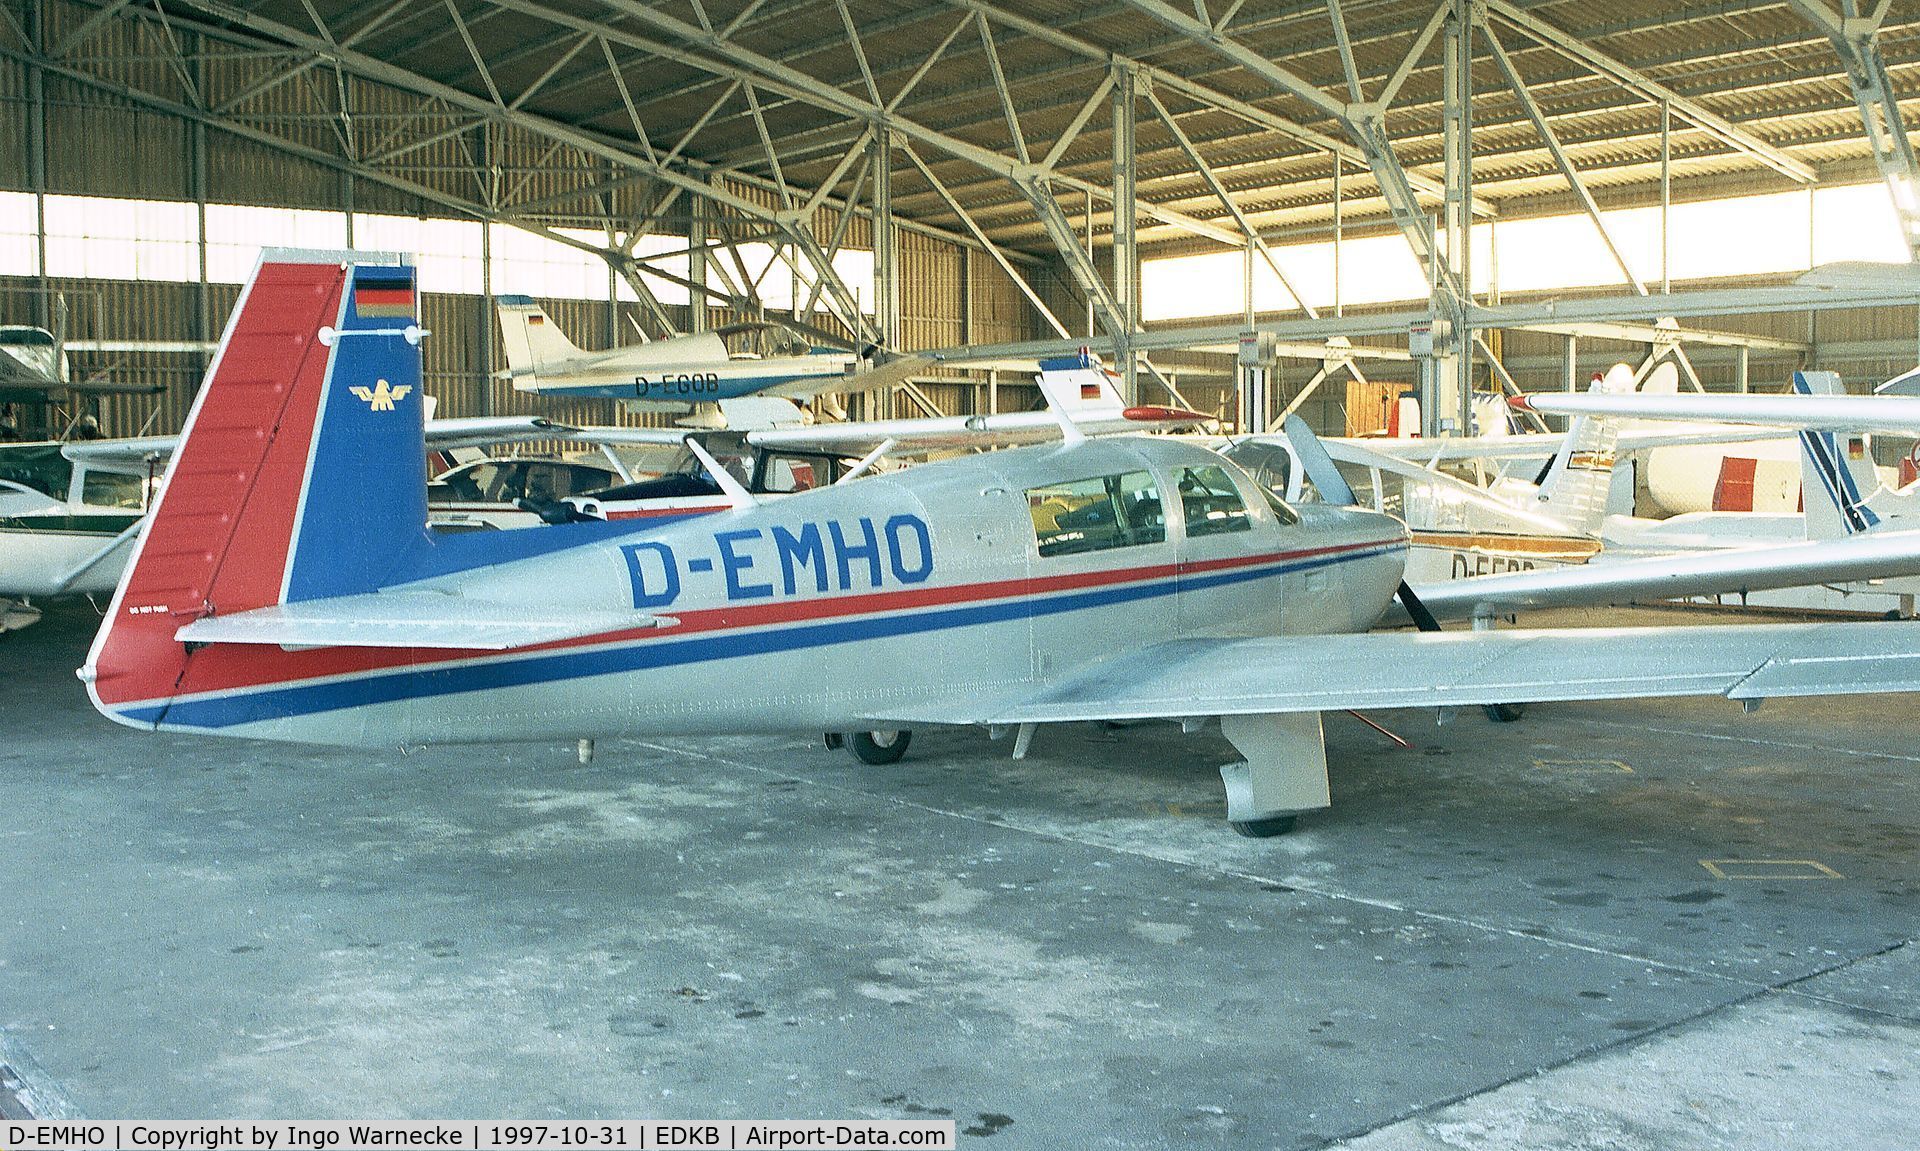 D-EMHO, 1980 Mooney M20J 201 C/N 24-1002, Mooney M20J Model 201 at Bonn-Hangelar airfield